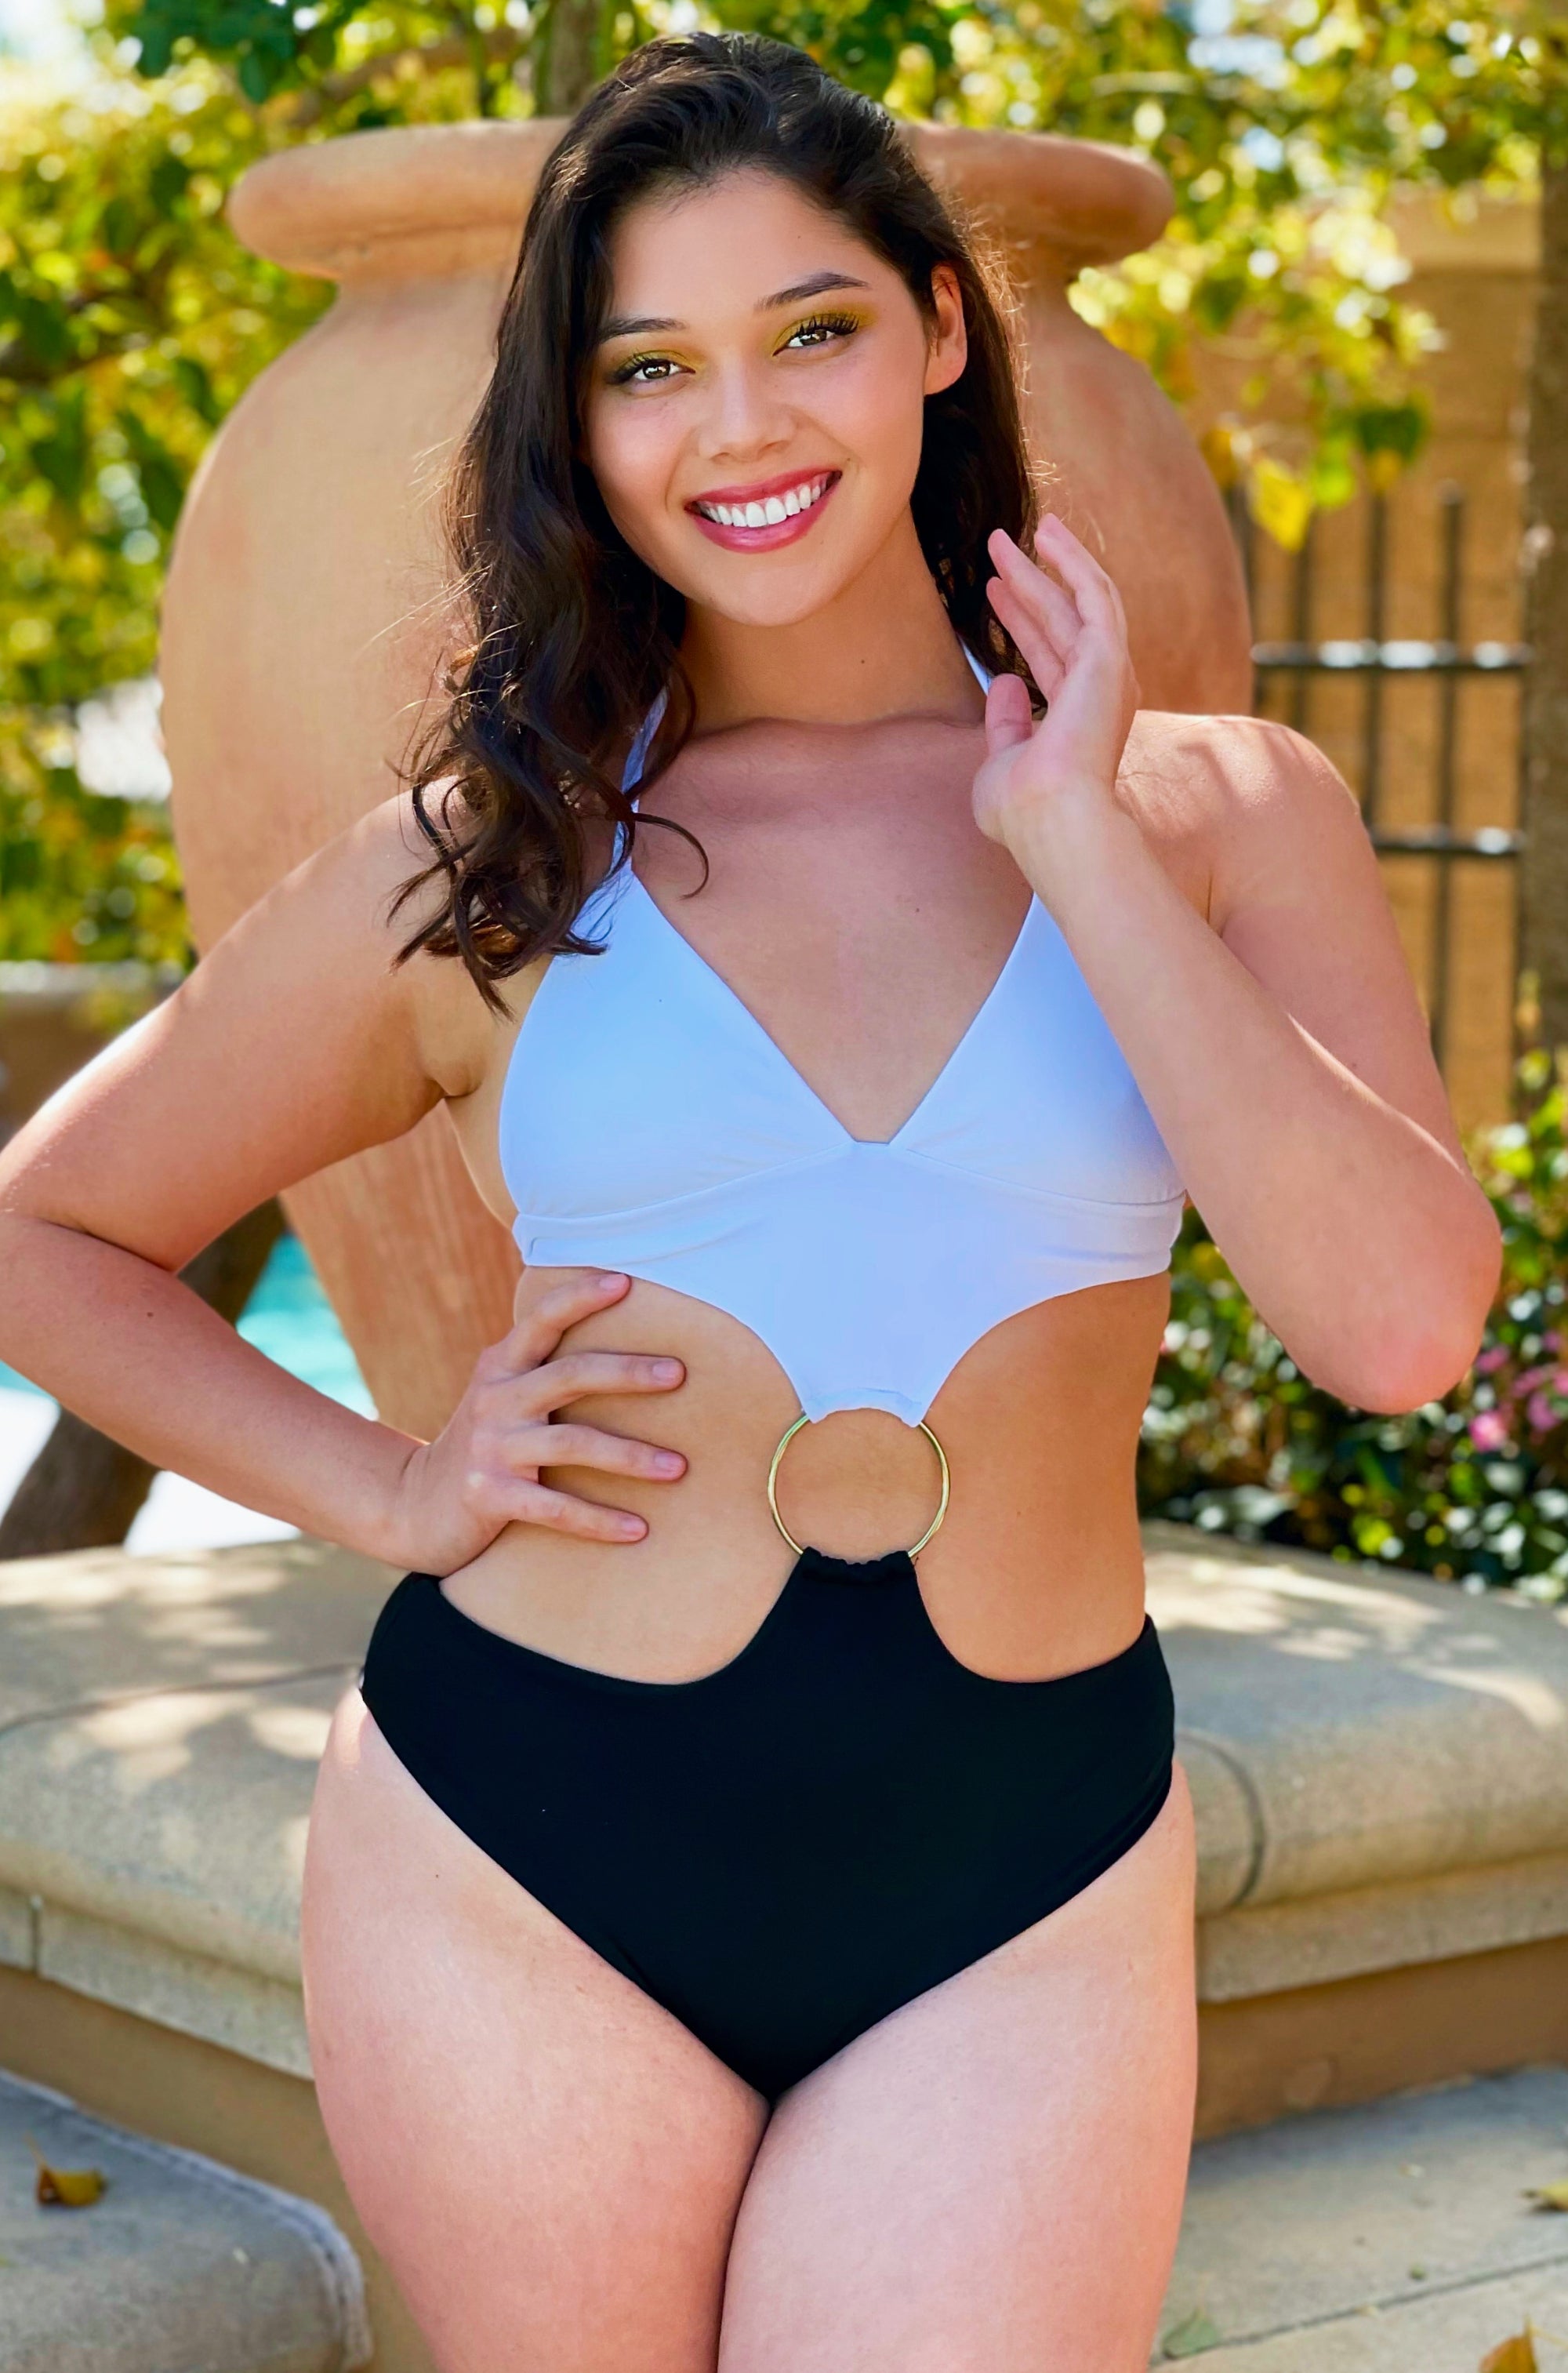 Custom swimsuit 90s O Ring Color-block Cut Out Monokini One Piece Swimsuit  - Black White. Cynababy